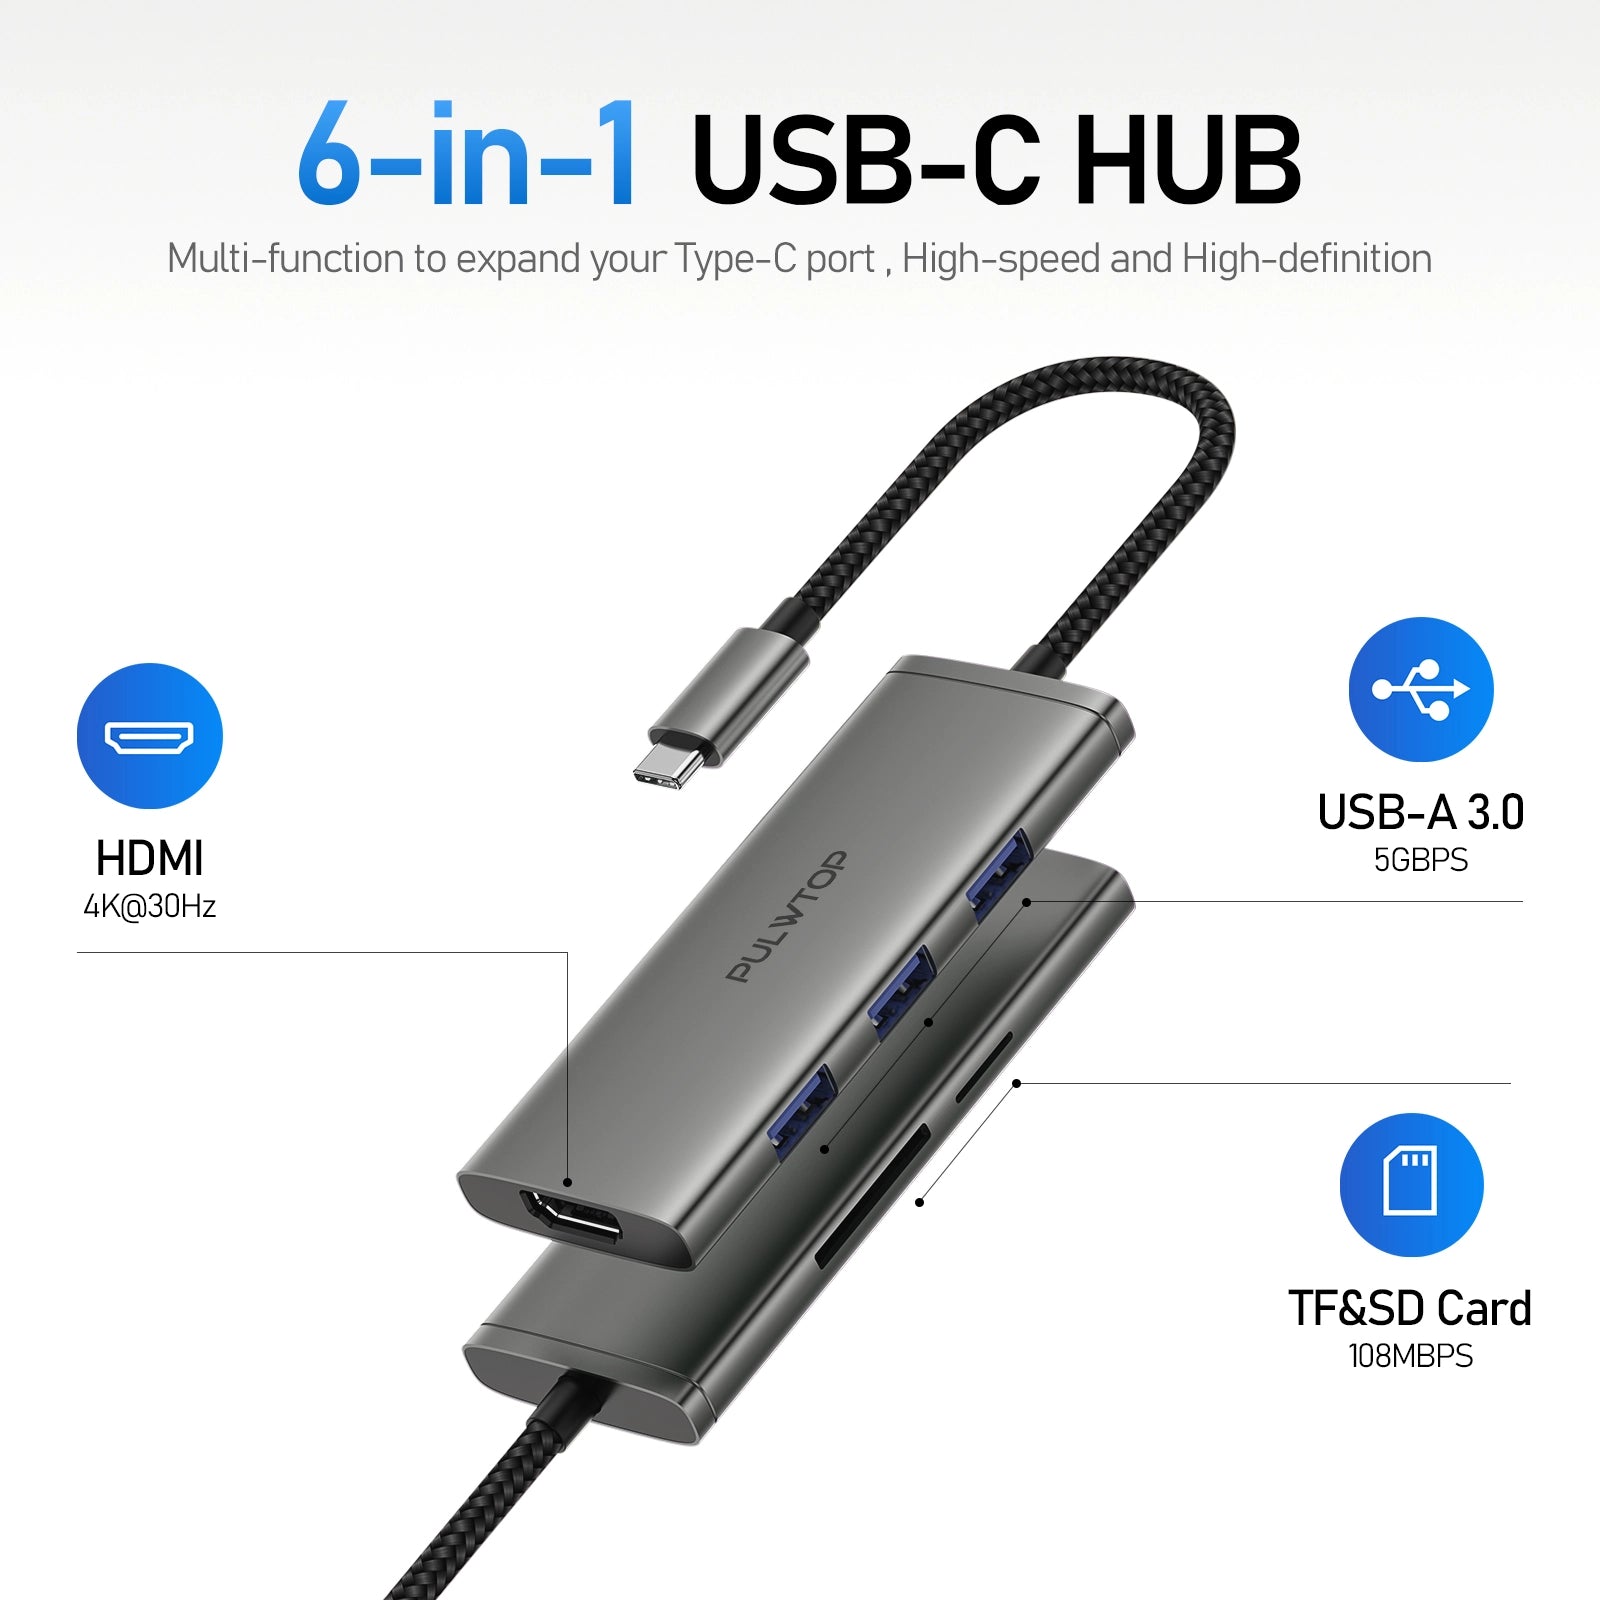 PULWTOP 6-in-1 USB hub with 4K HDMI, USB A 3.0, SD/TF card reader, suitable for MacBook Pro/ Air, Dell XPS and more Type C devices